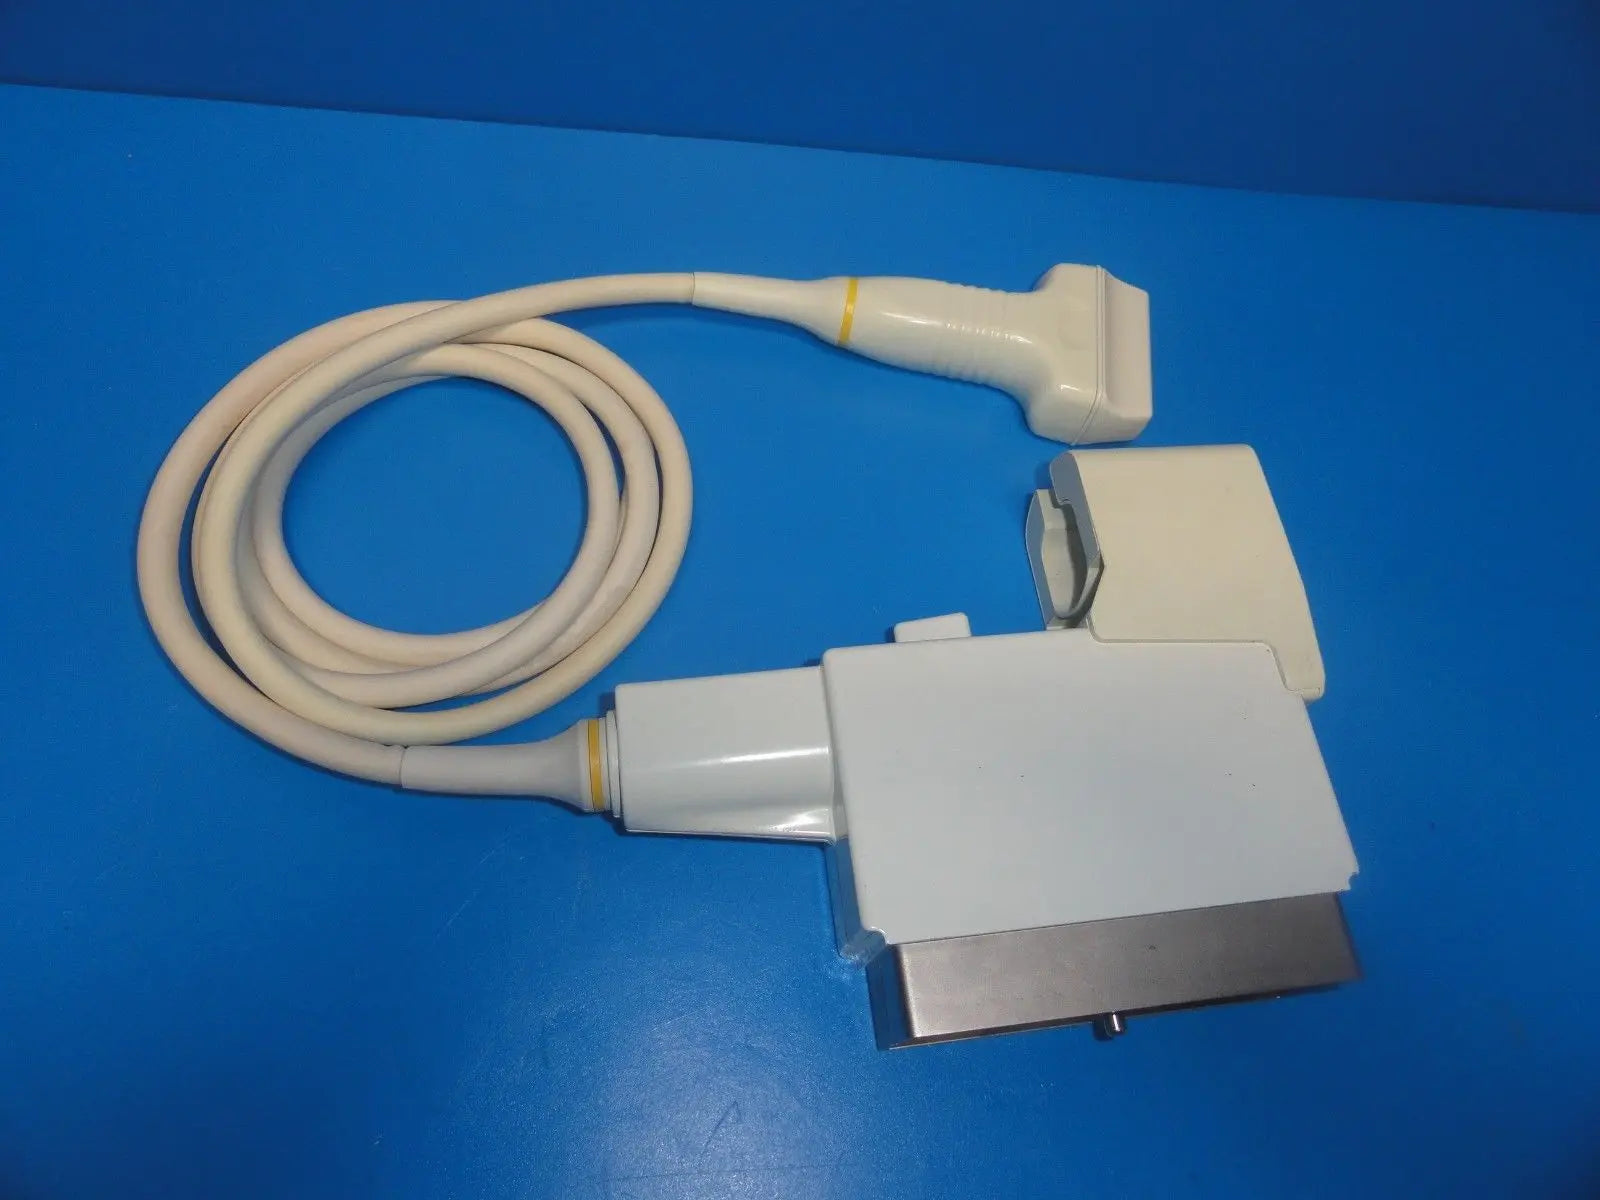 GE 546L P/N 2153405 Linear Array Ultrasound Transducer W/ Hook for logiq (6355)